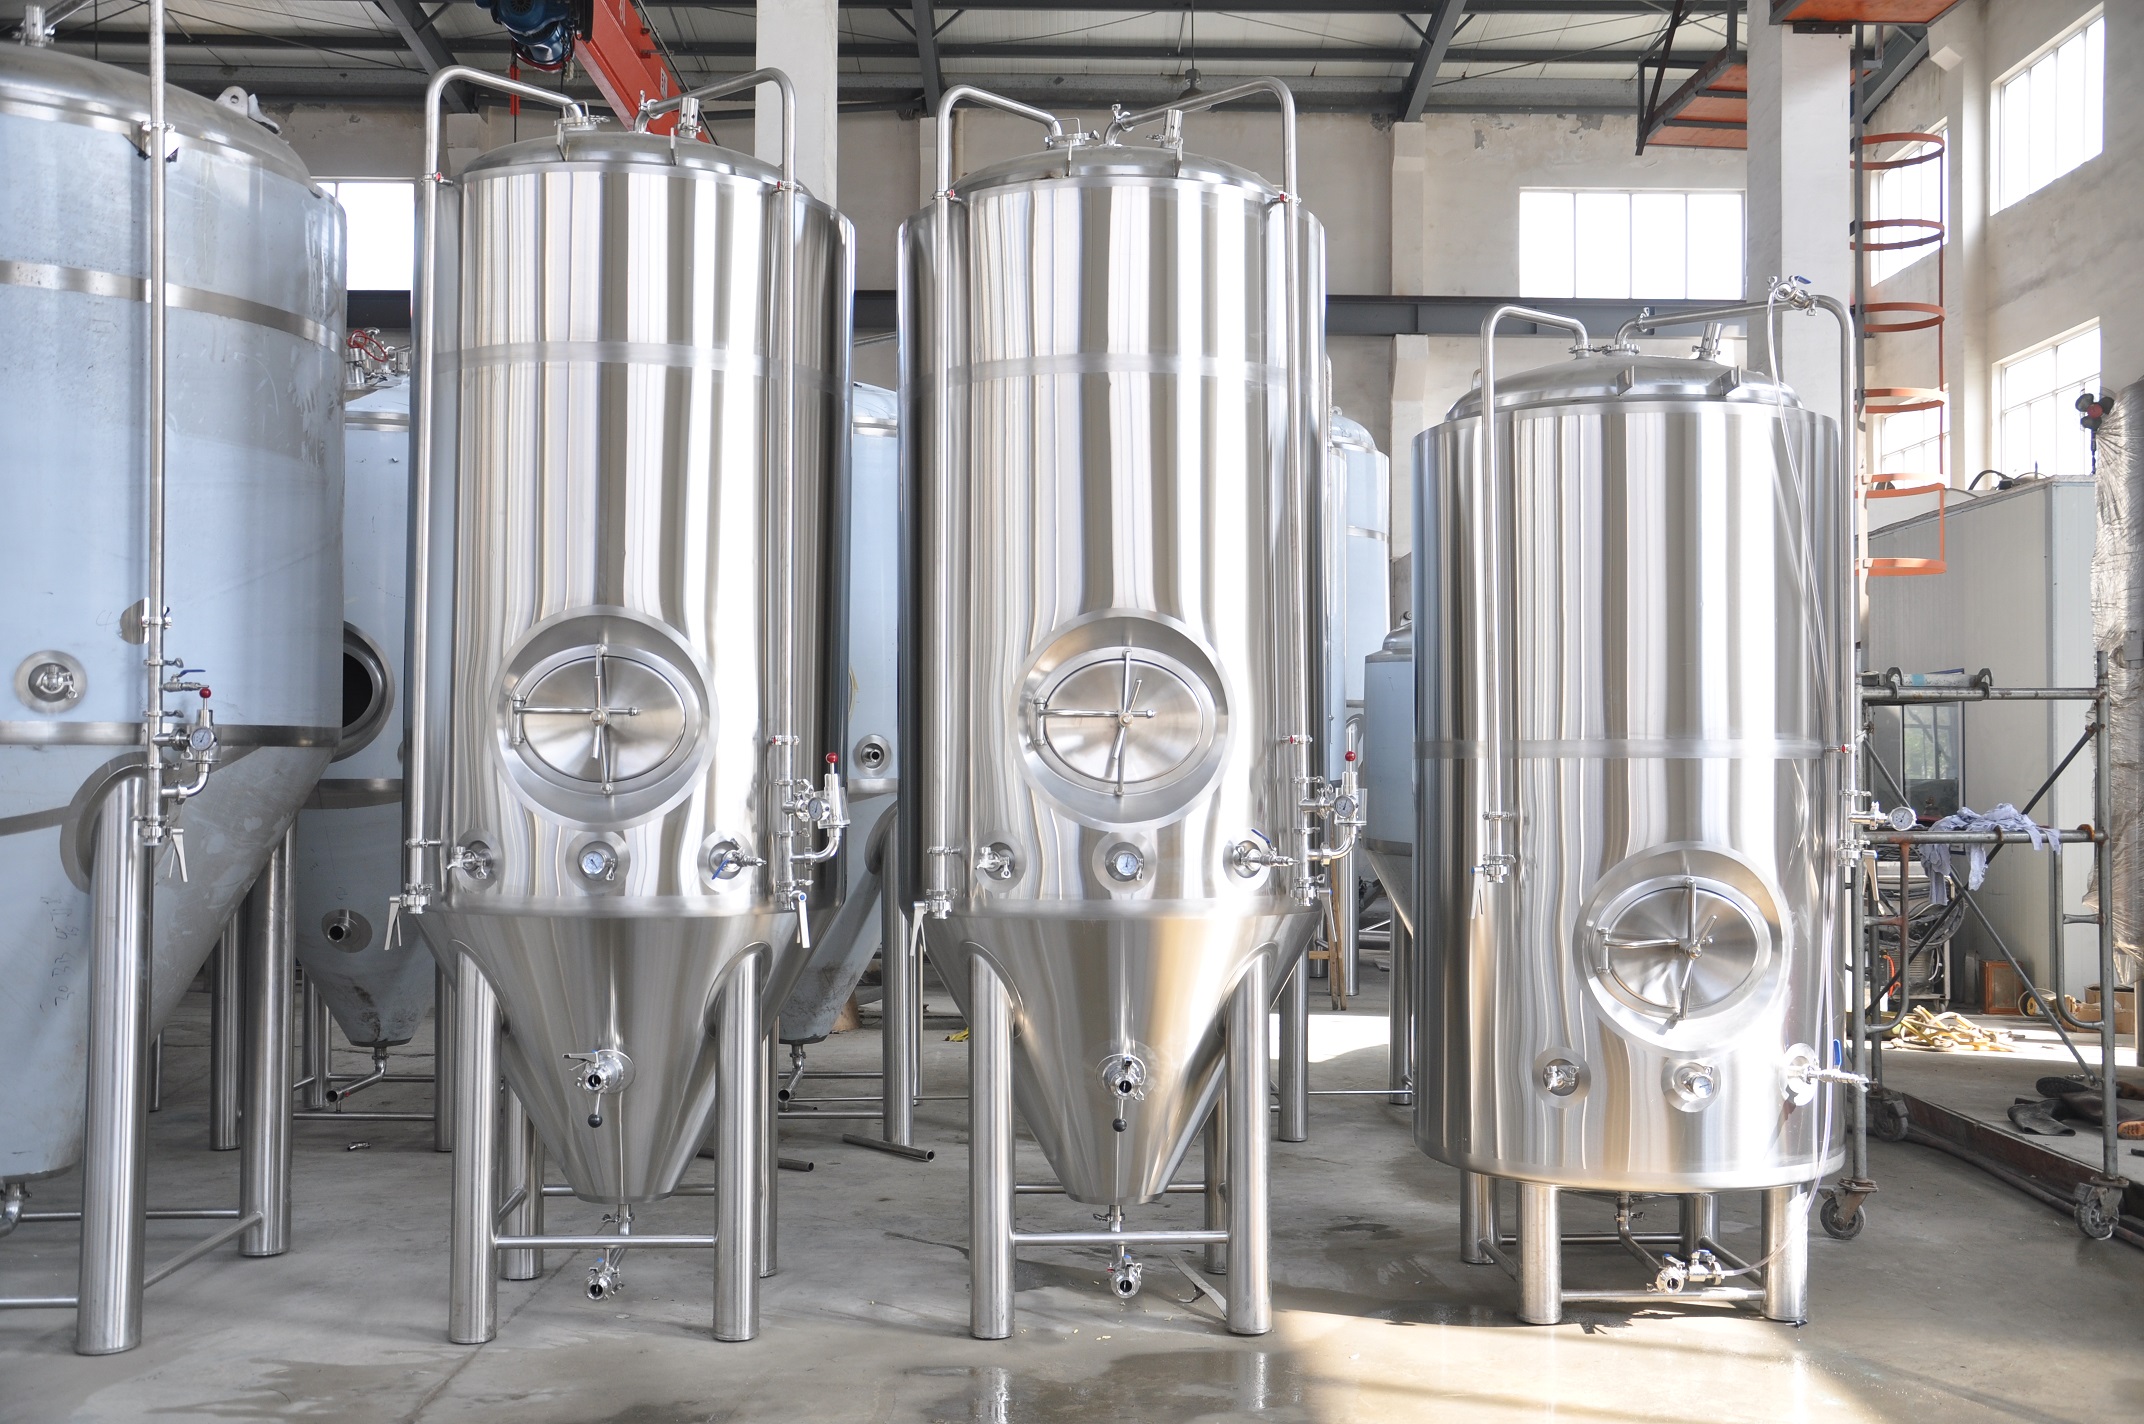 The Advantage of Using Slender Beer Fermenters And Brite Tanks